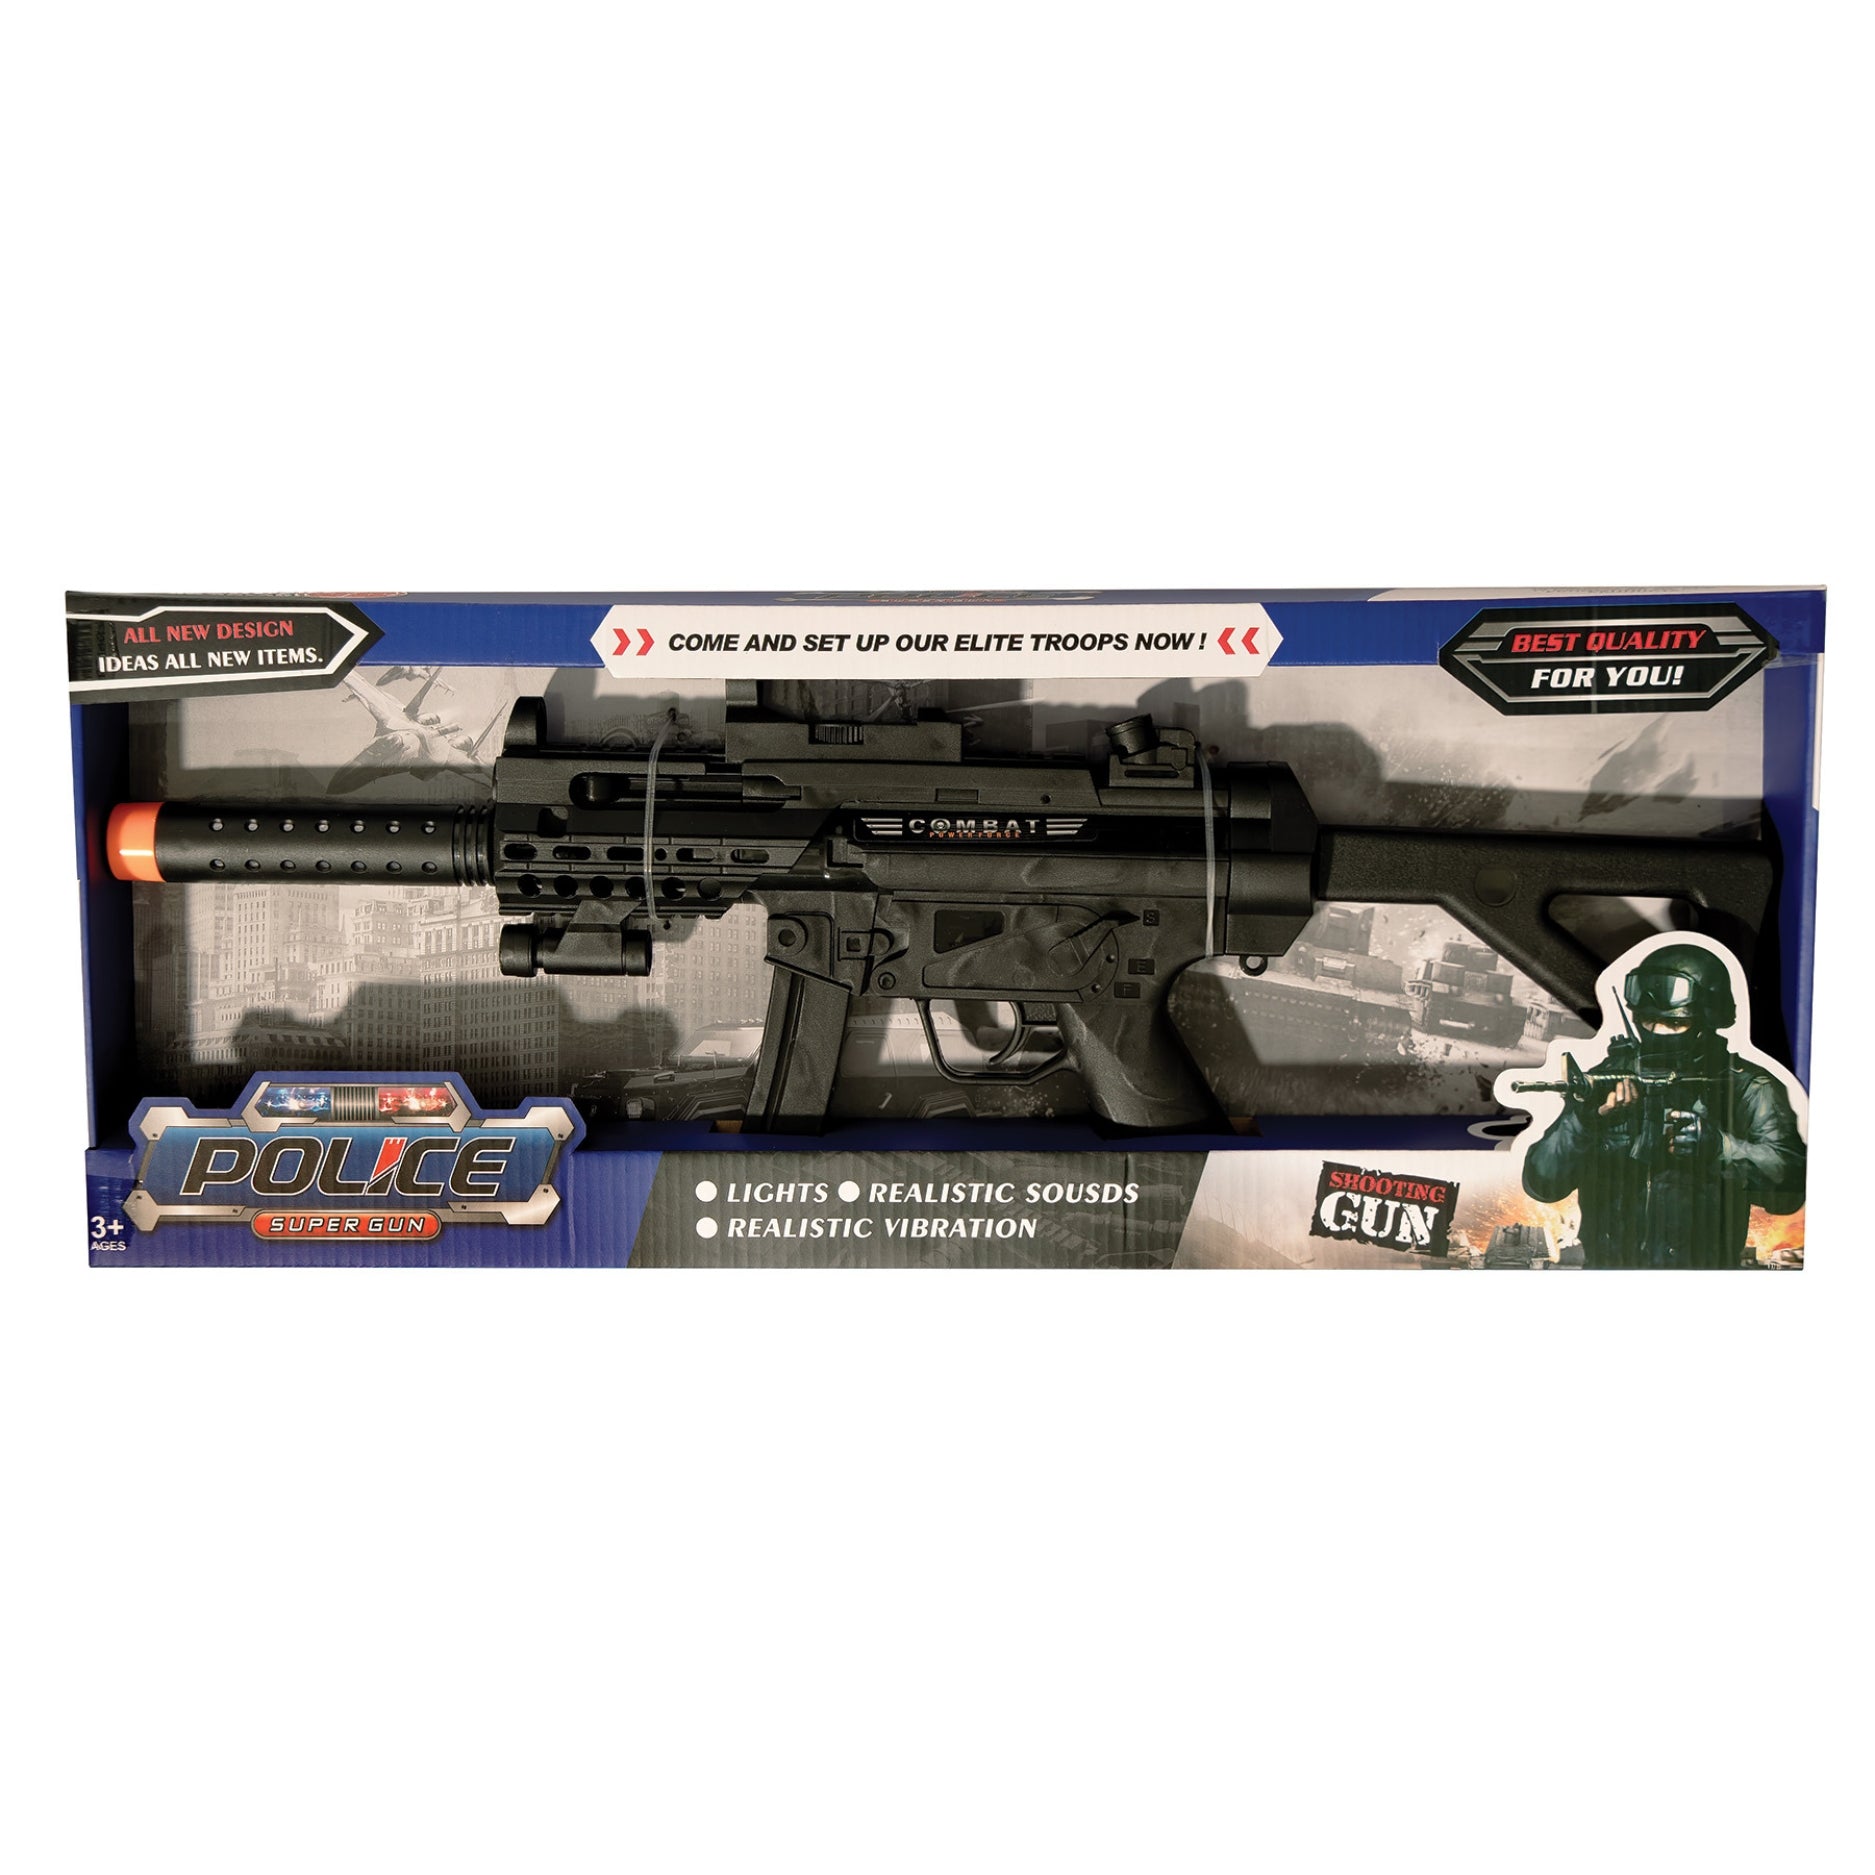 Rothco Special Forces Combat Toy Gun 613902571006 - 1